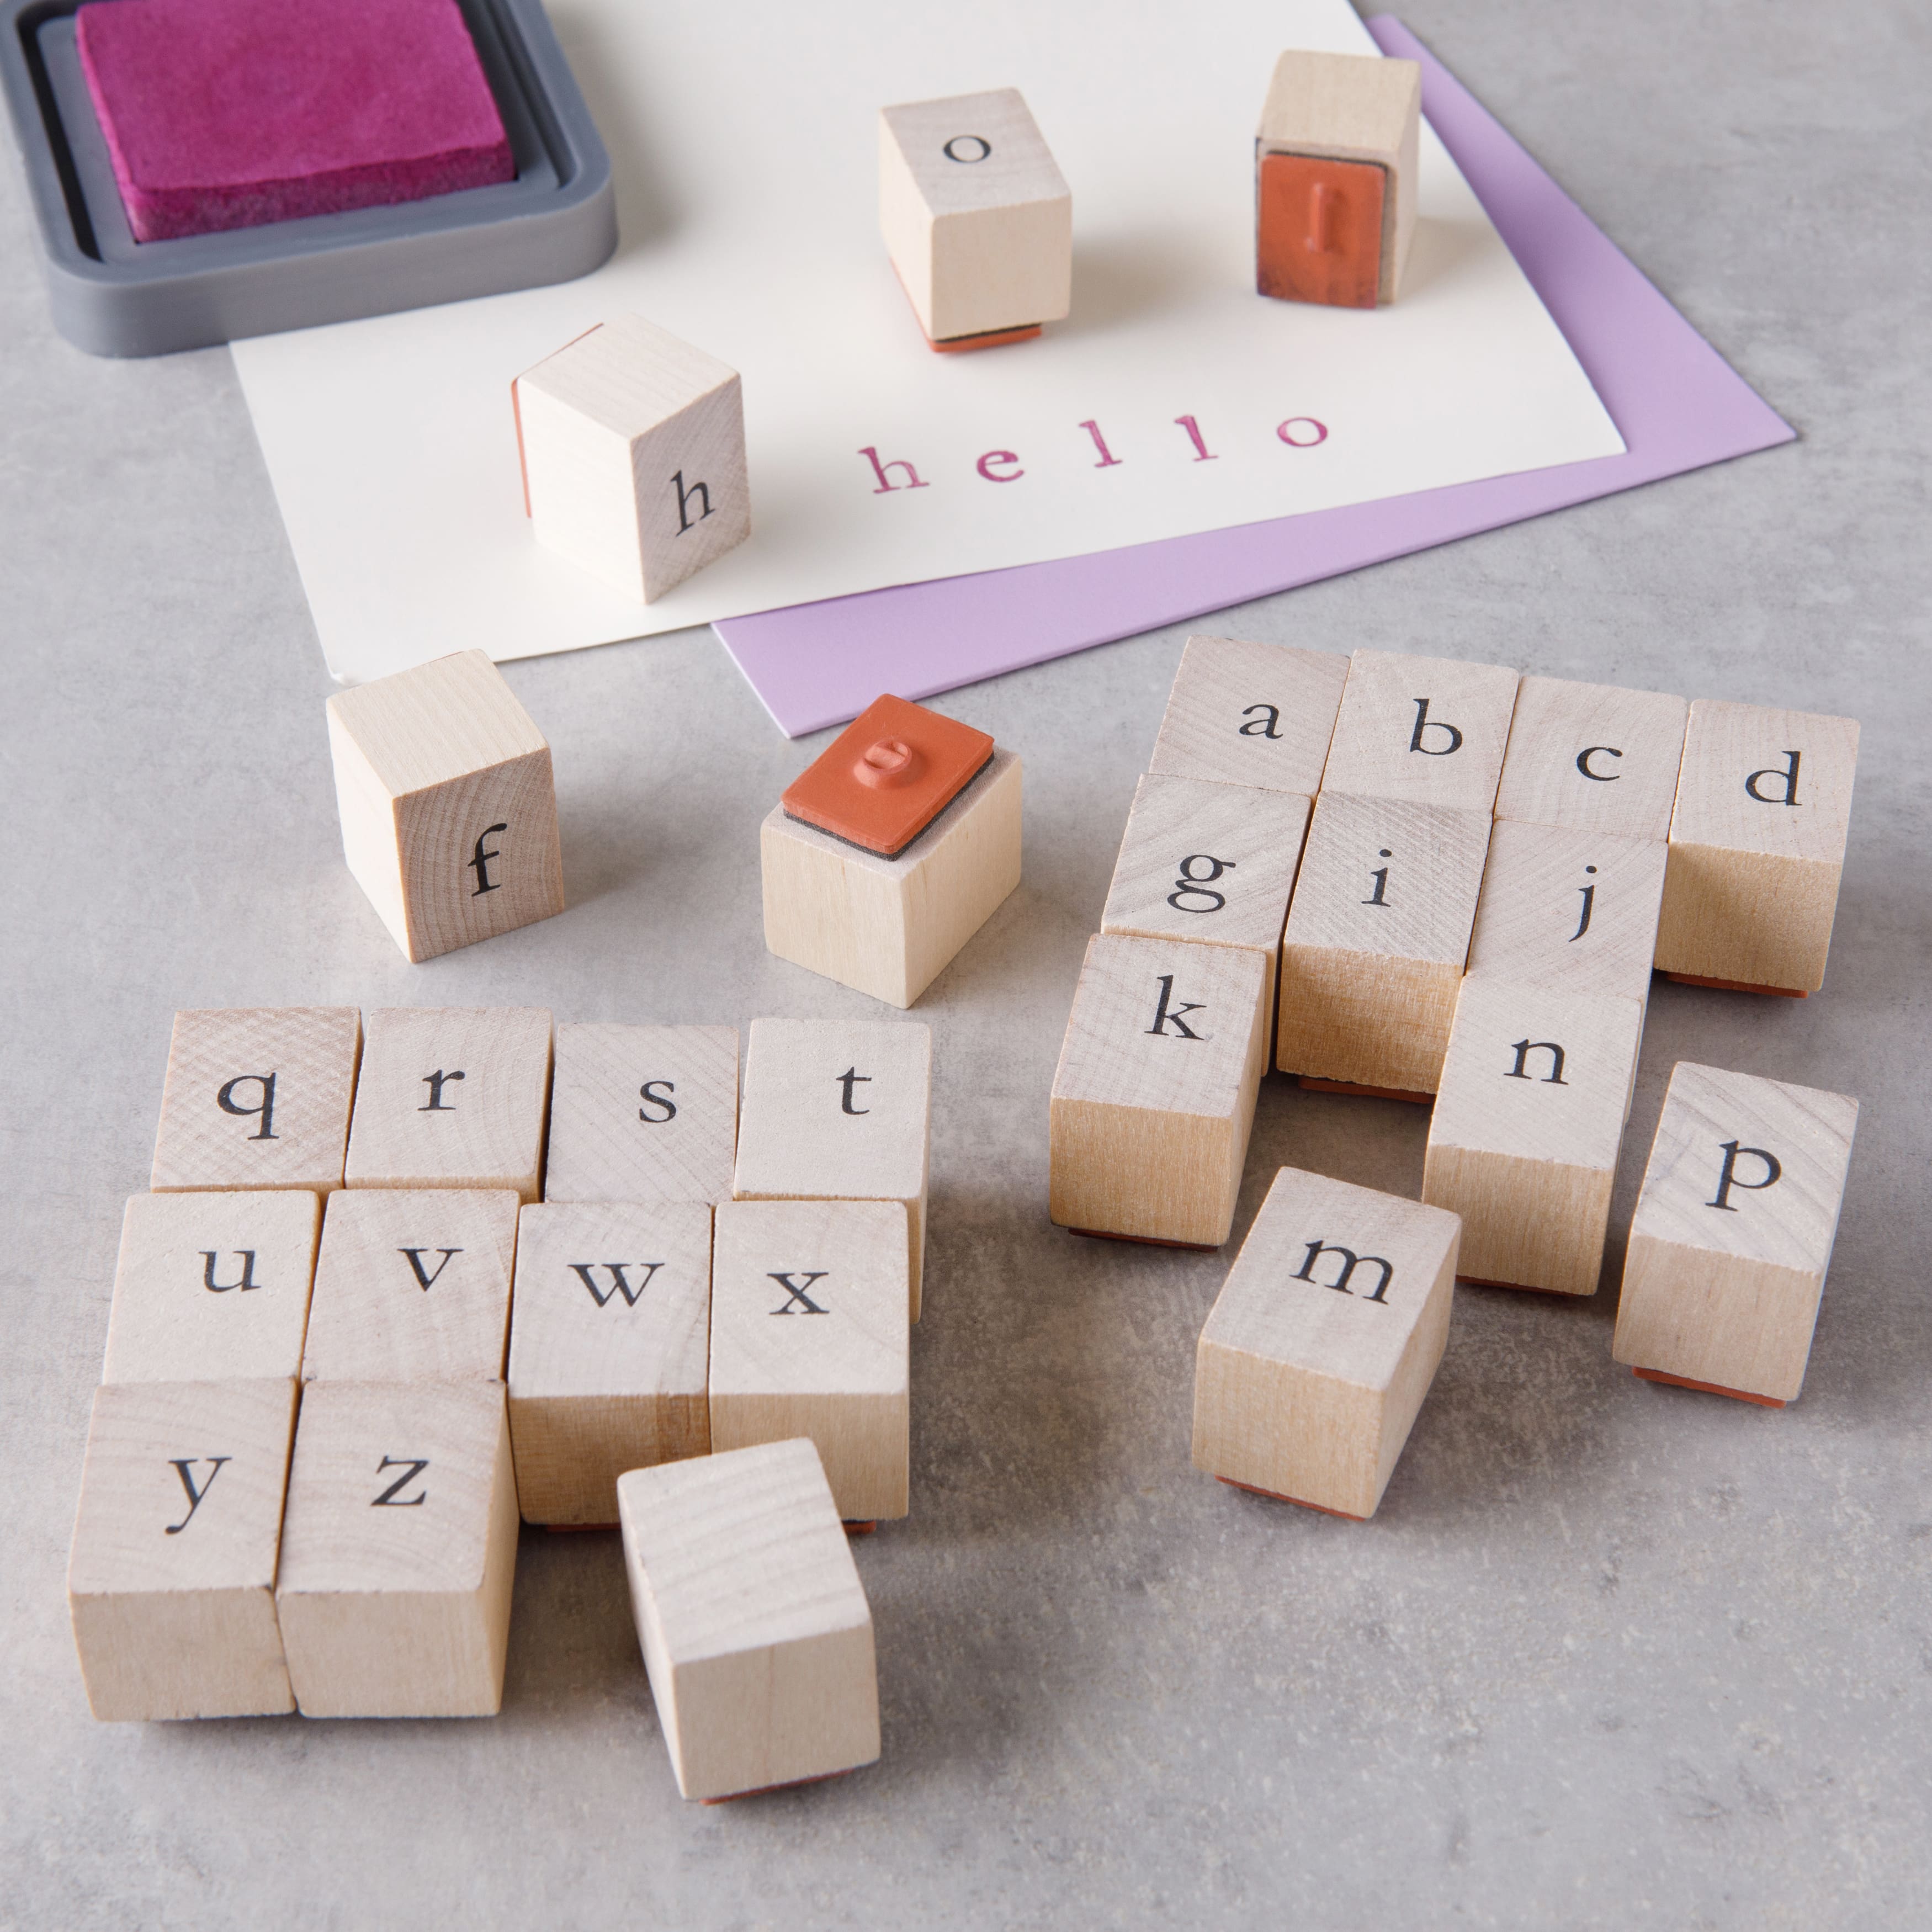 Find the Walnut Hollow® Hot Stamps Alphabet Set, Lowercase at Michaels